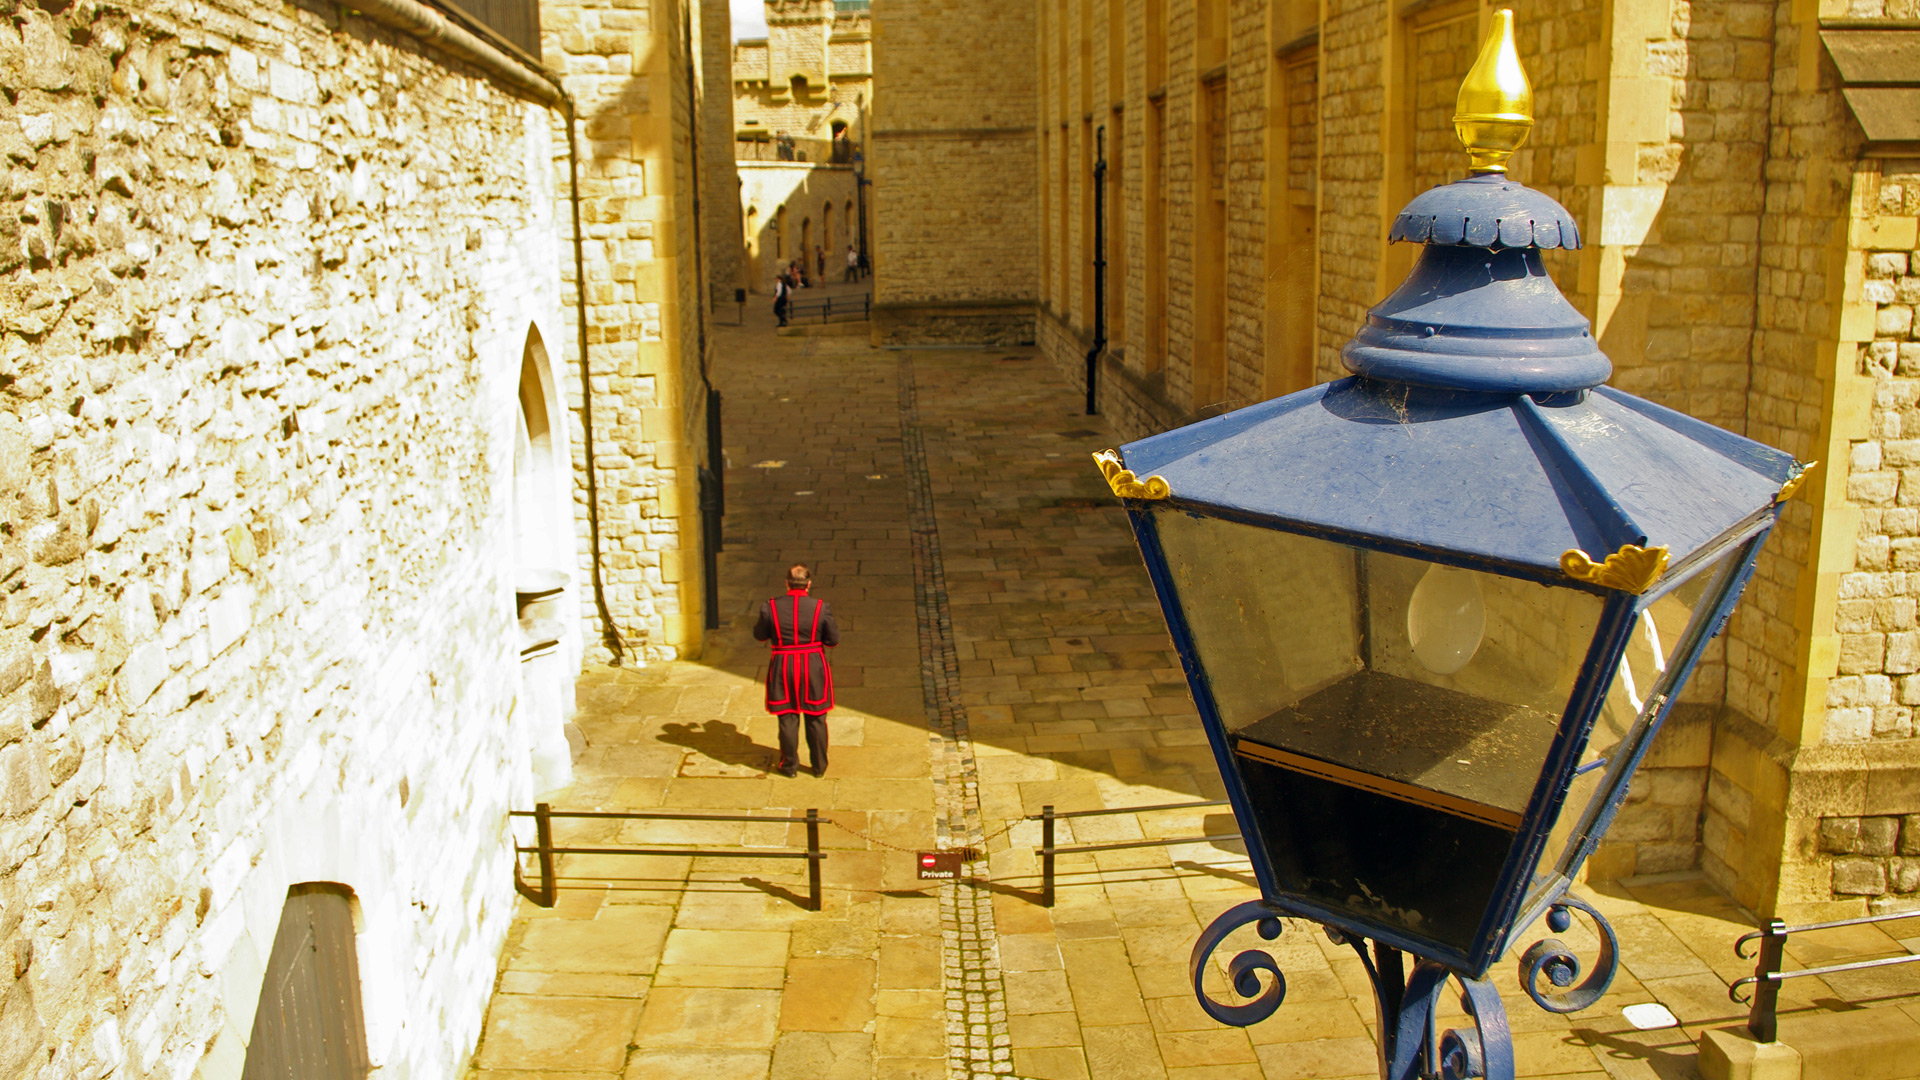 A Yeoman Warder at the end of shift - Tower of London